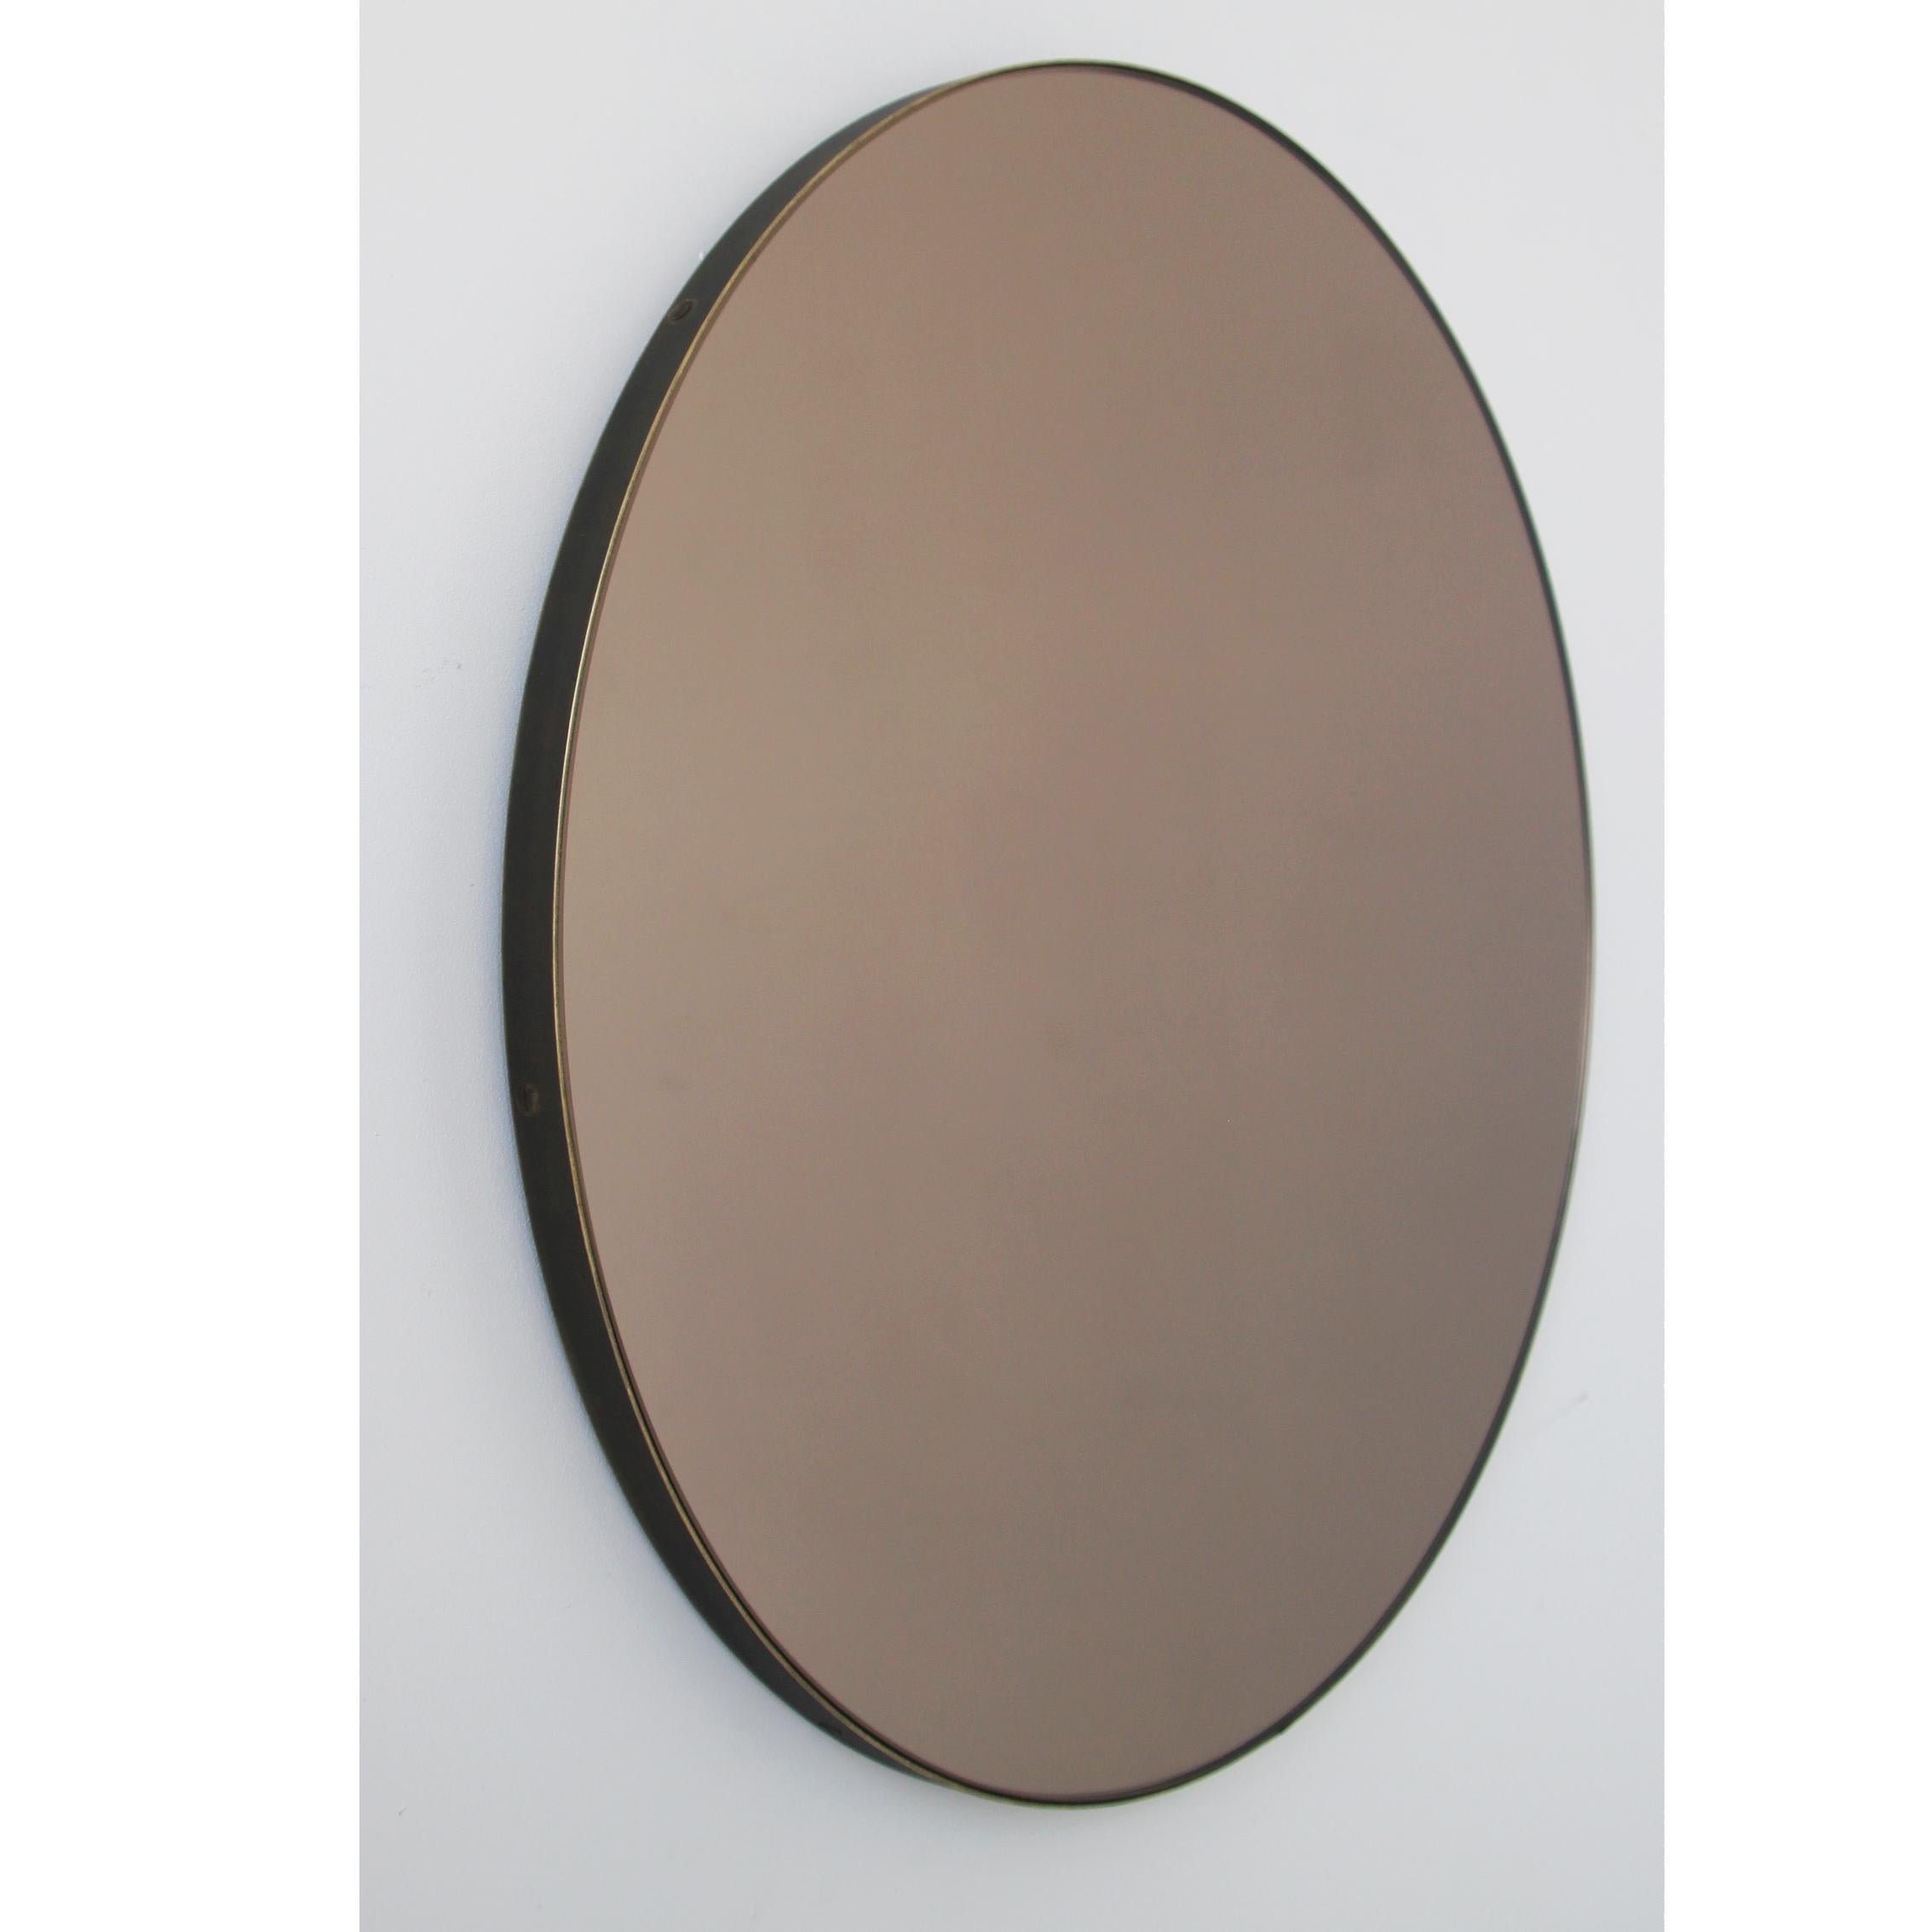 Contemporary bronze tinted round mirror with an elegant bronze patina brass frame. Designed and handcrafted in London, UK.

Medium, large and extra-large mirrors (60, 80 and 100cm) are fitted with an ingenious French cleat (split batten) system so